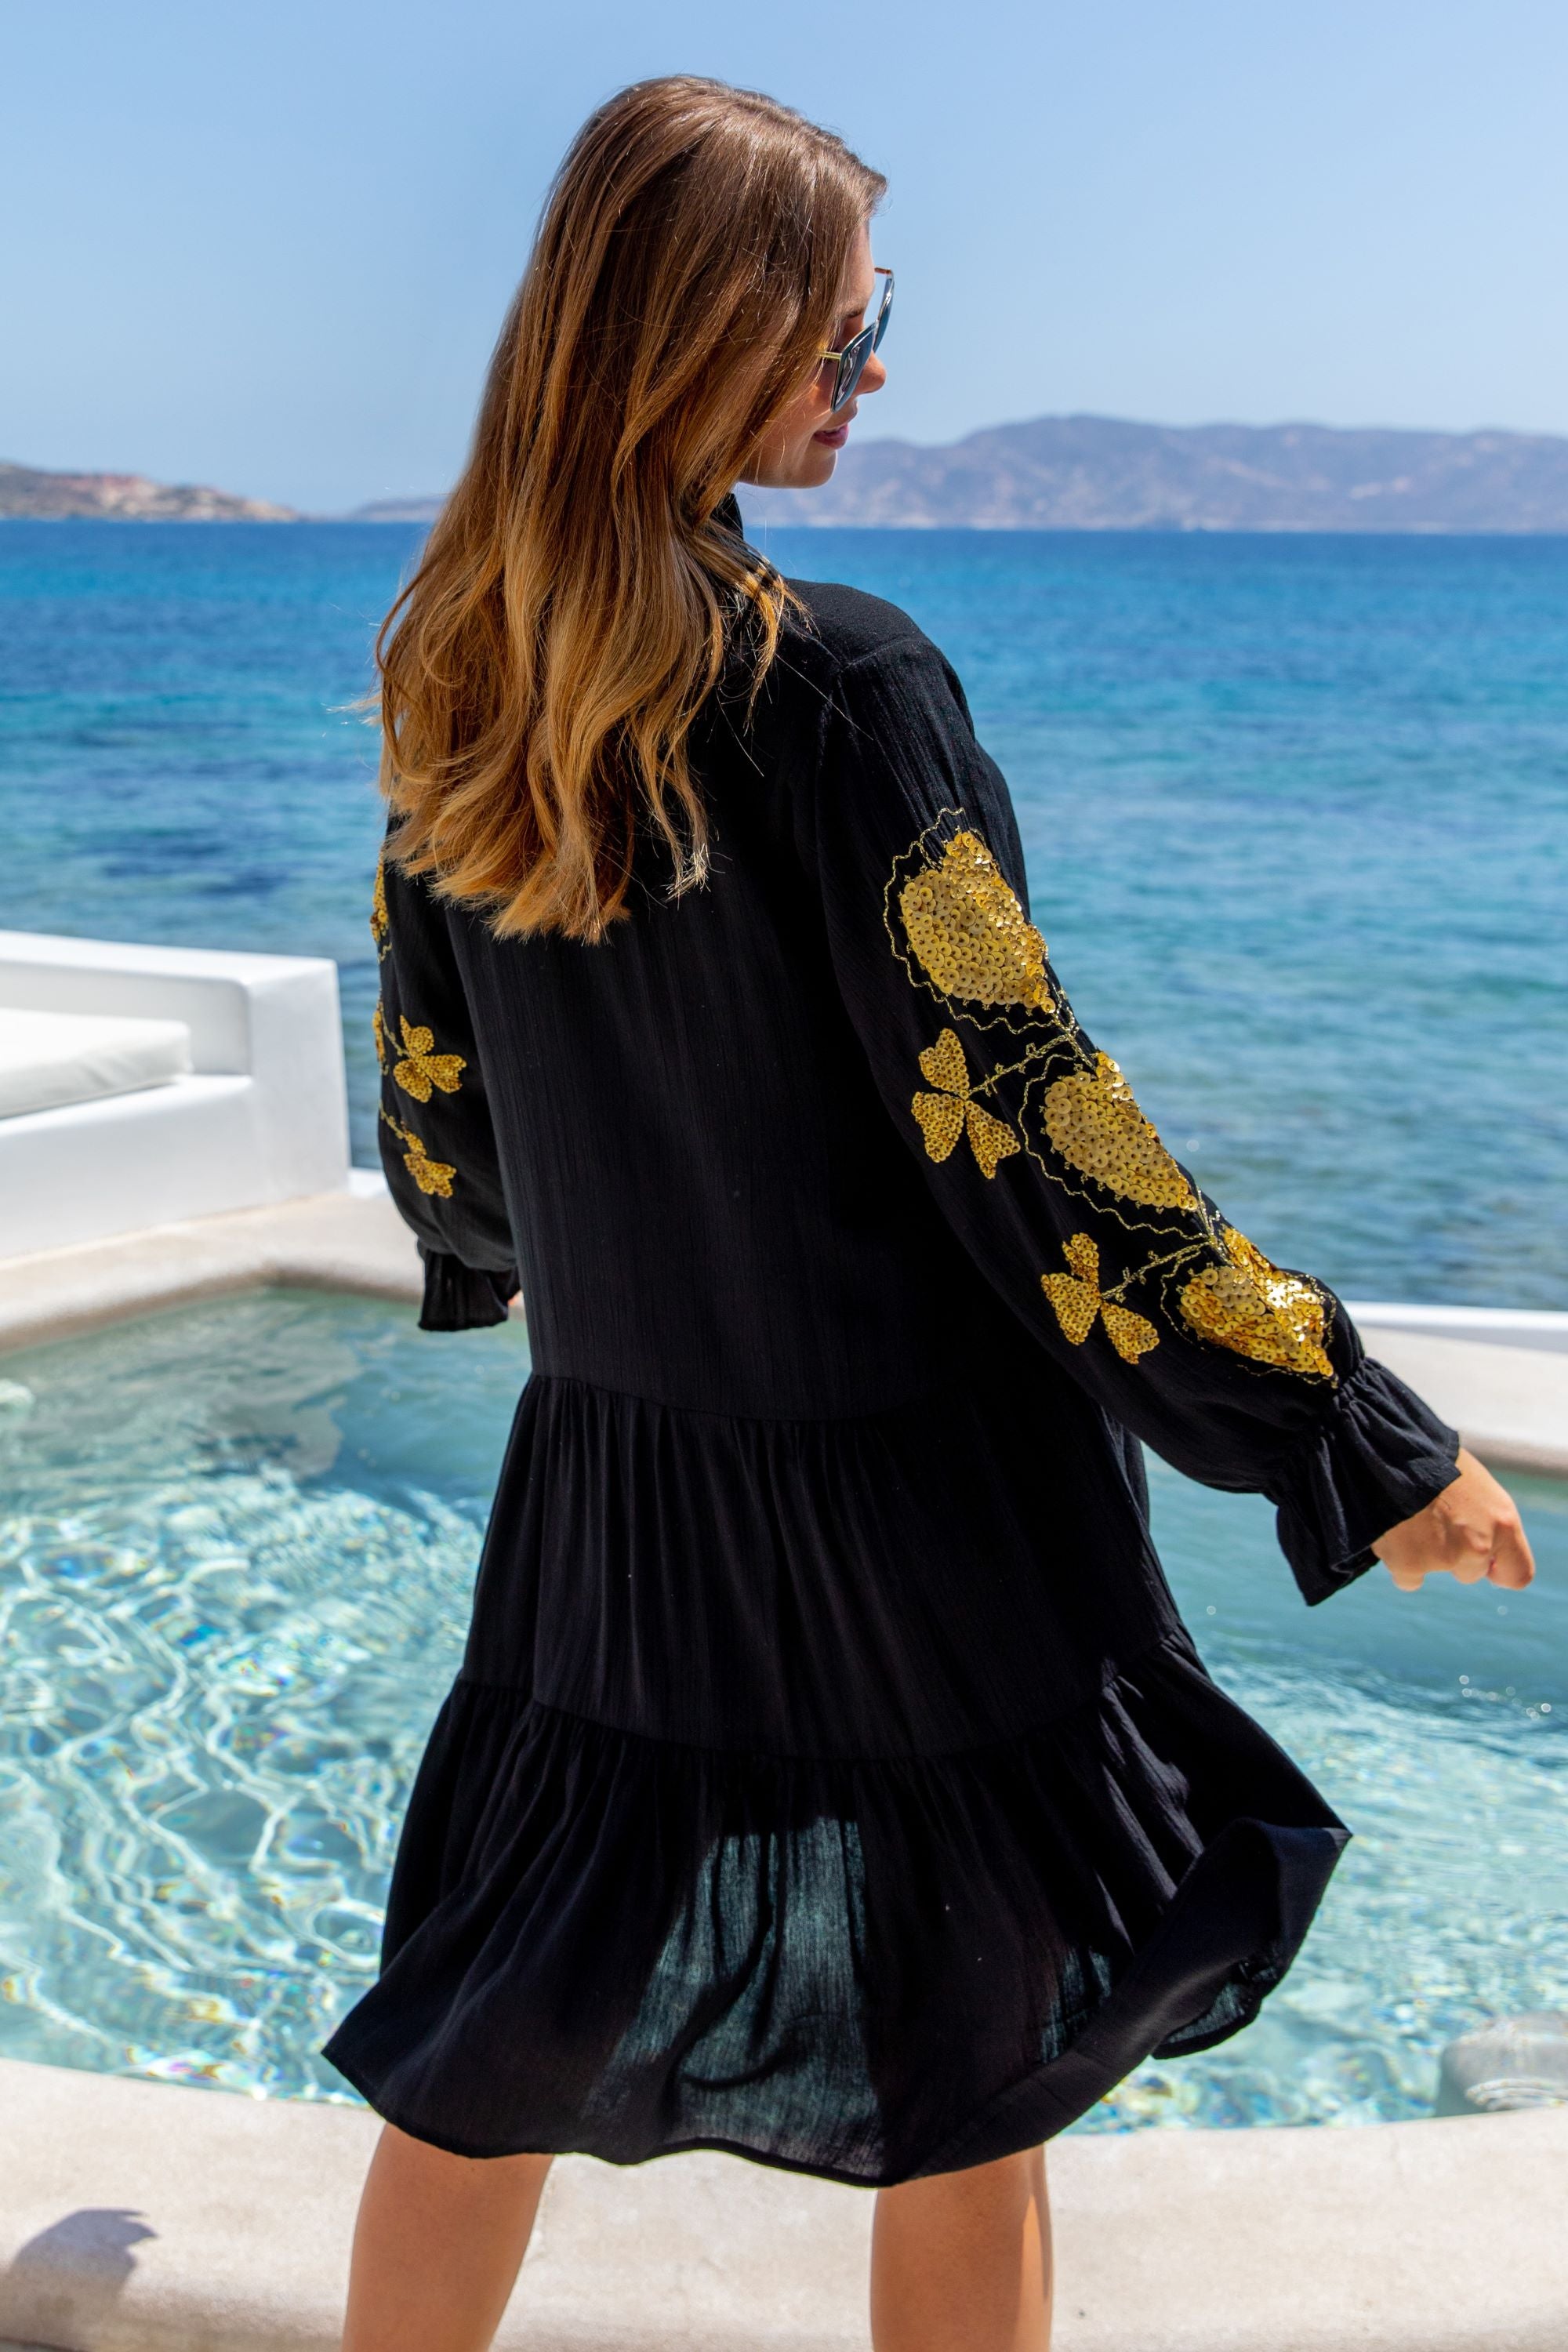 Black cotton dress with gold sleeve detail by Lindsey Brown resort wear 